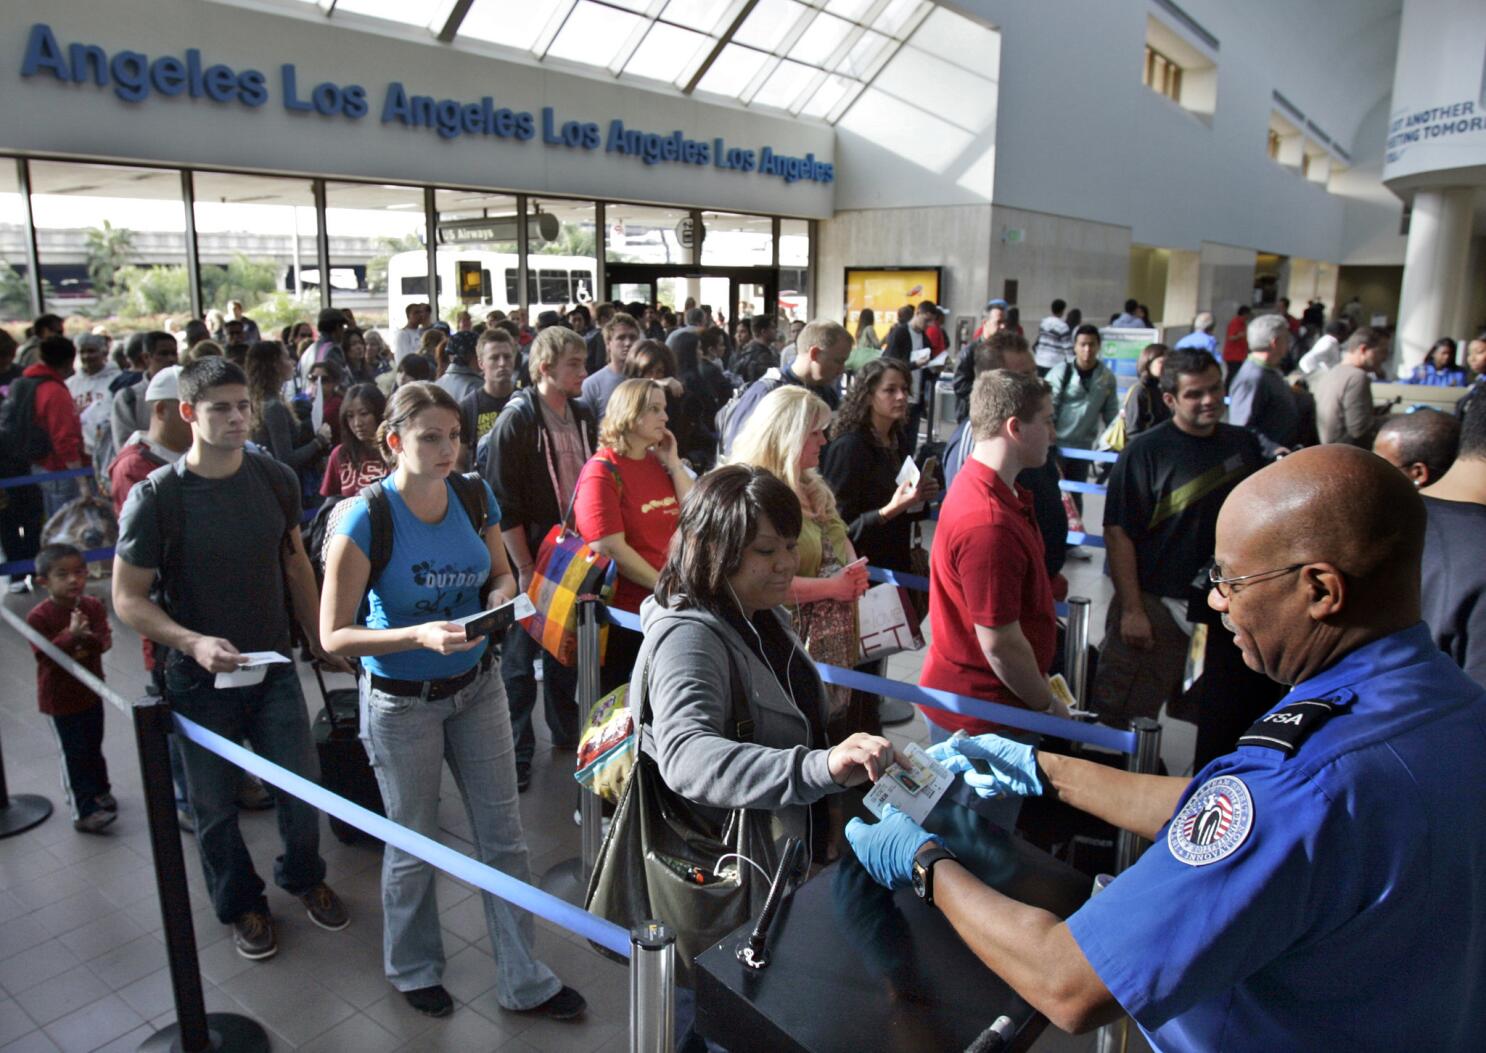 A TSA employee advises travelers that liquids are not allowed through the  gate at at the Los Angeles International Airport Wednesday, Oct. 10, 2012.  In an age when travelers have to toss